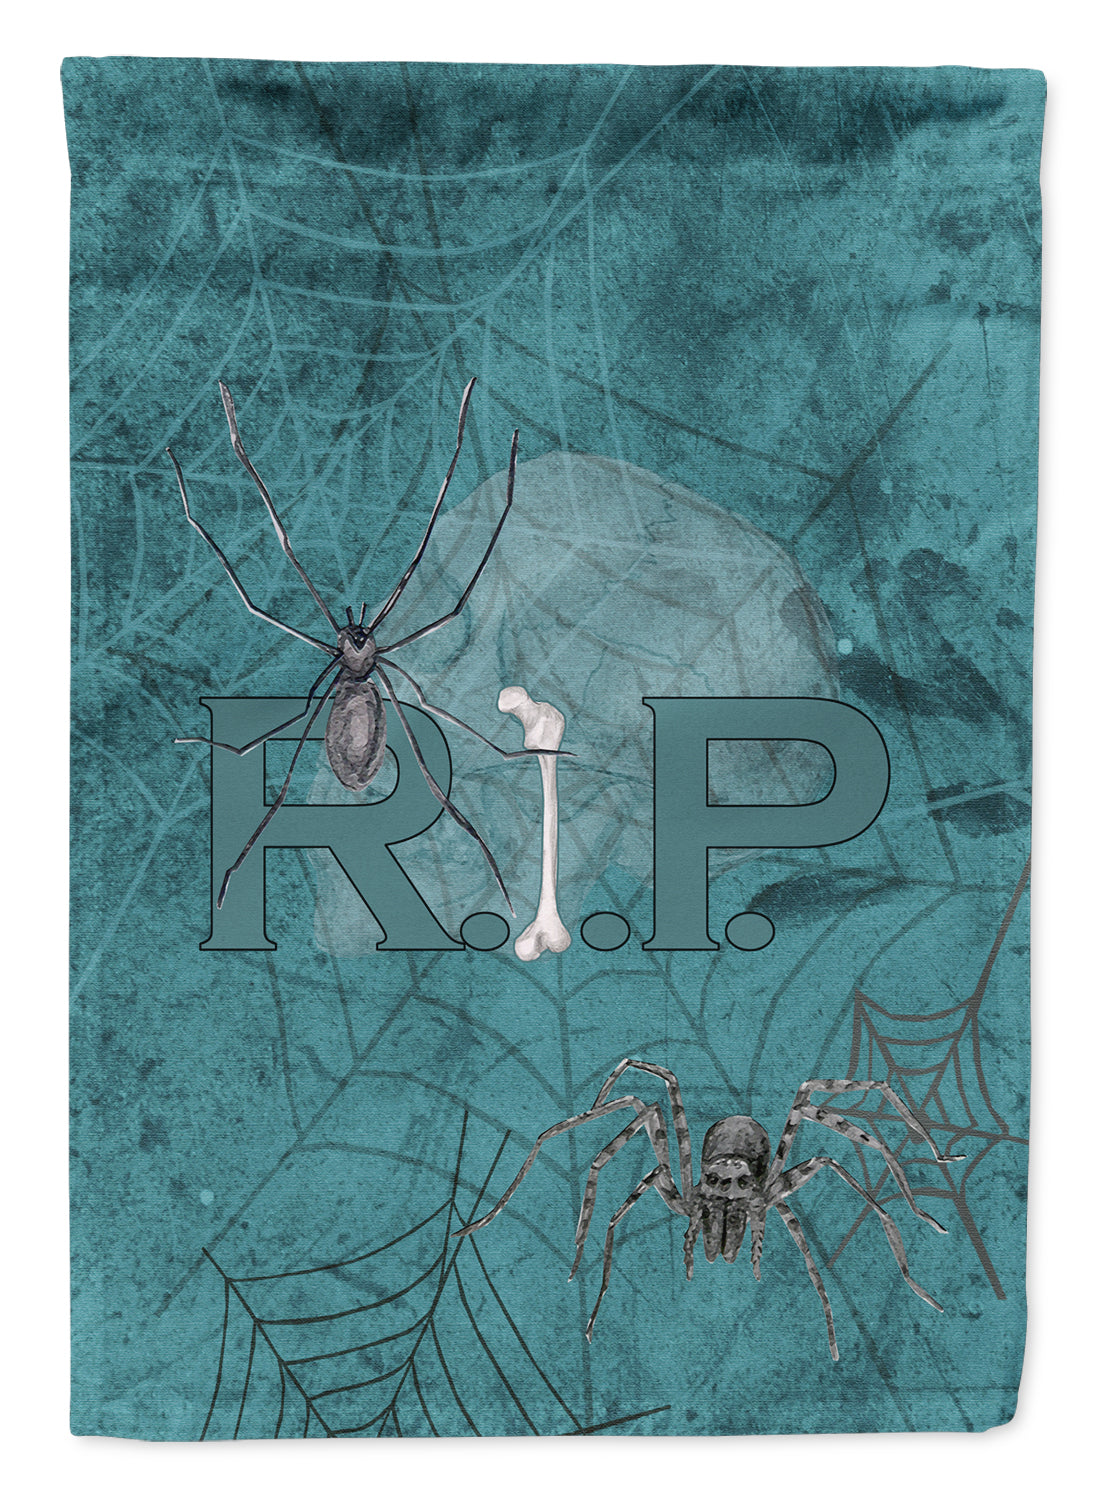 RIP Rest in Peace with spider web Halloween Flag Garden Size.